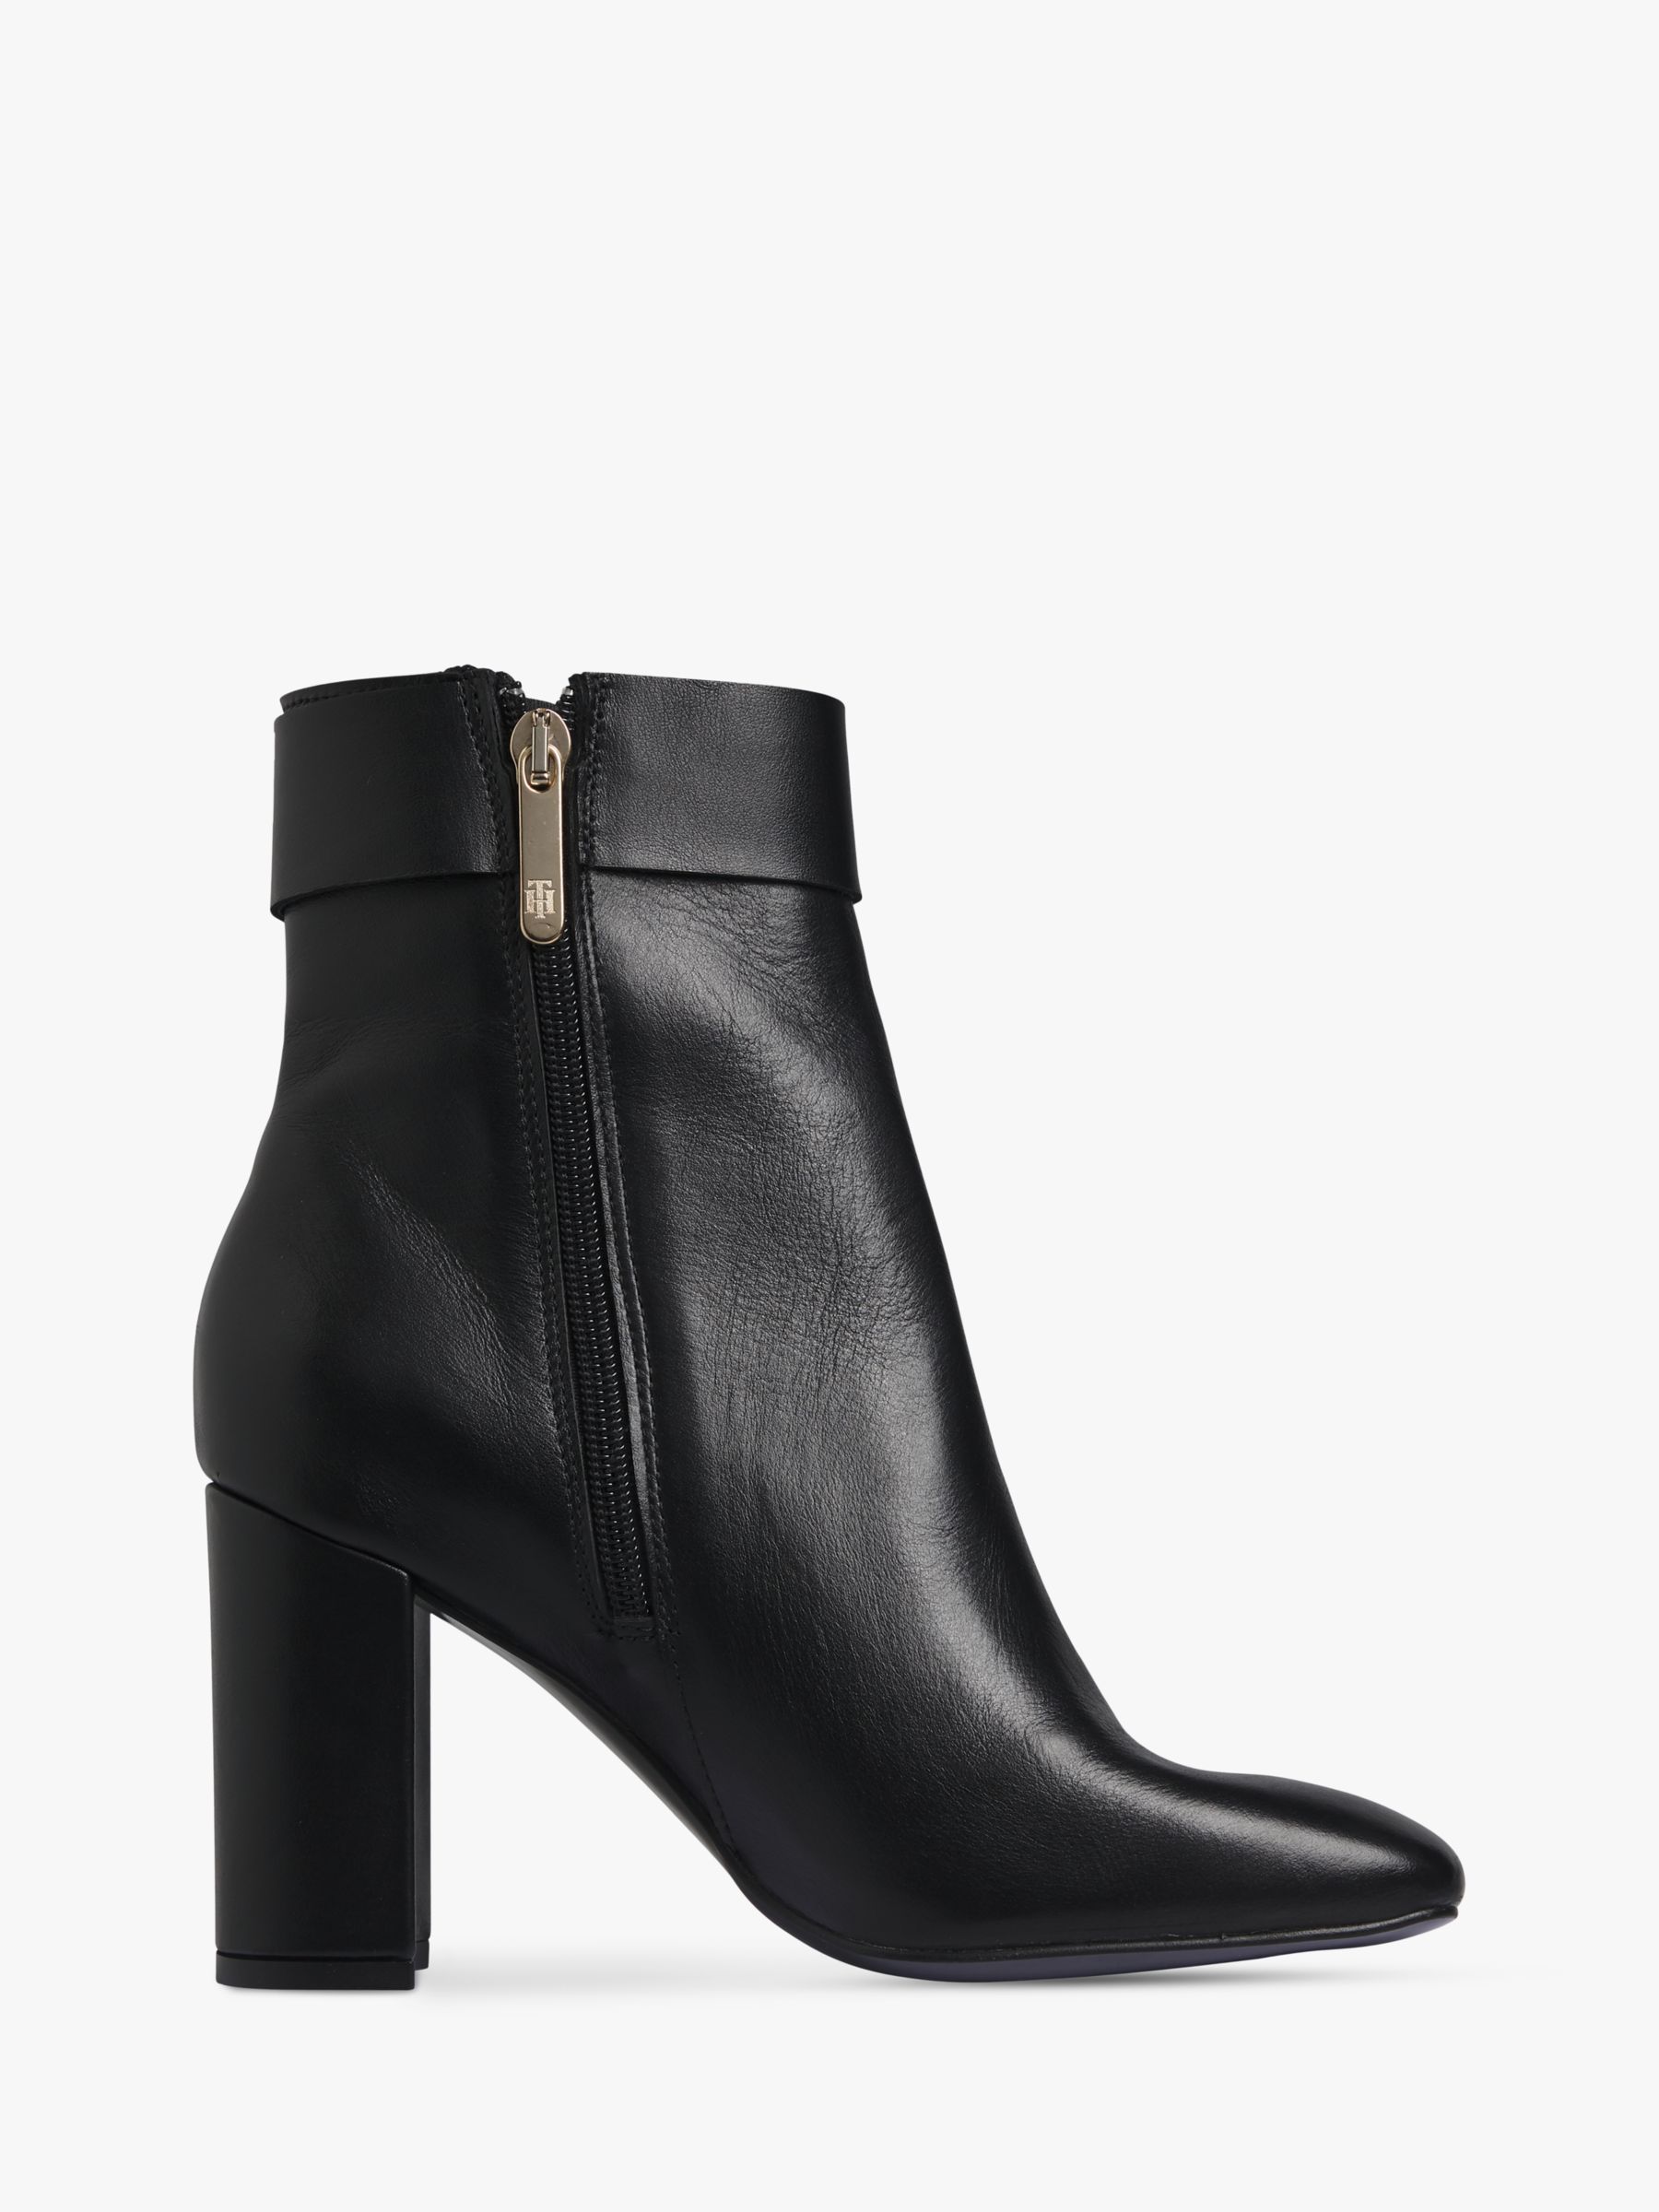 tommy hilfiger black leather boots